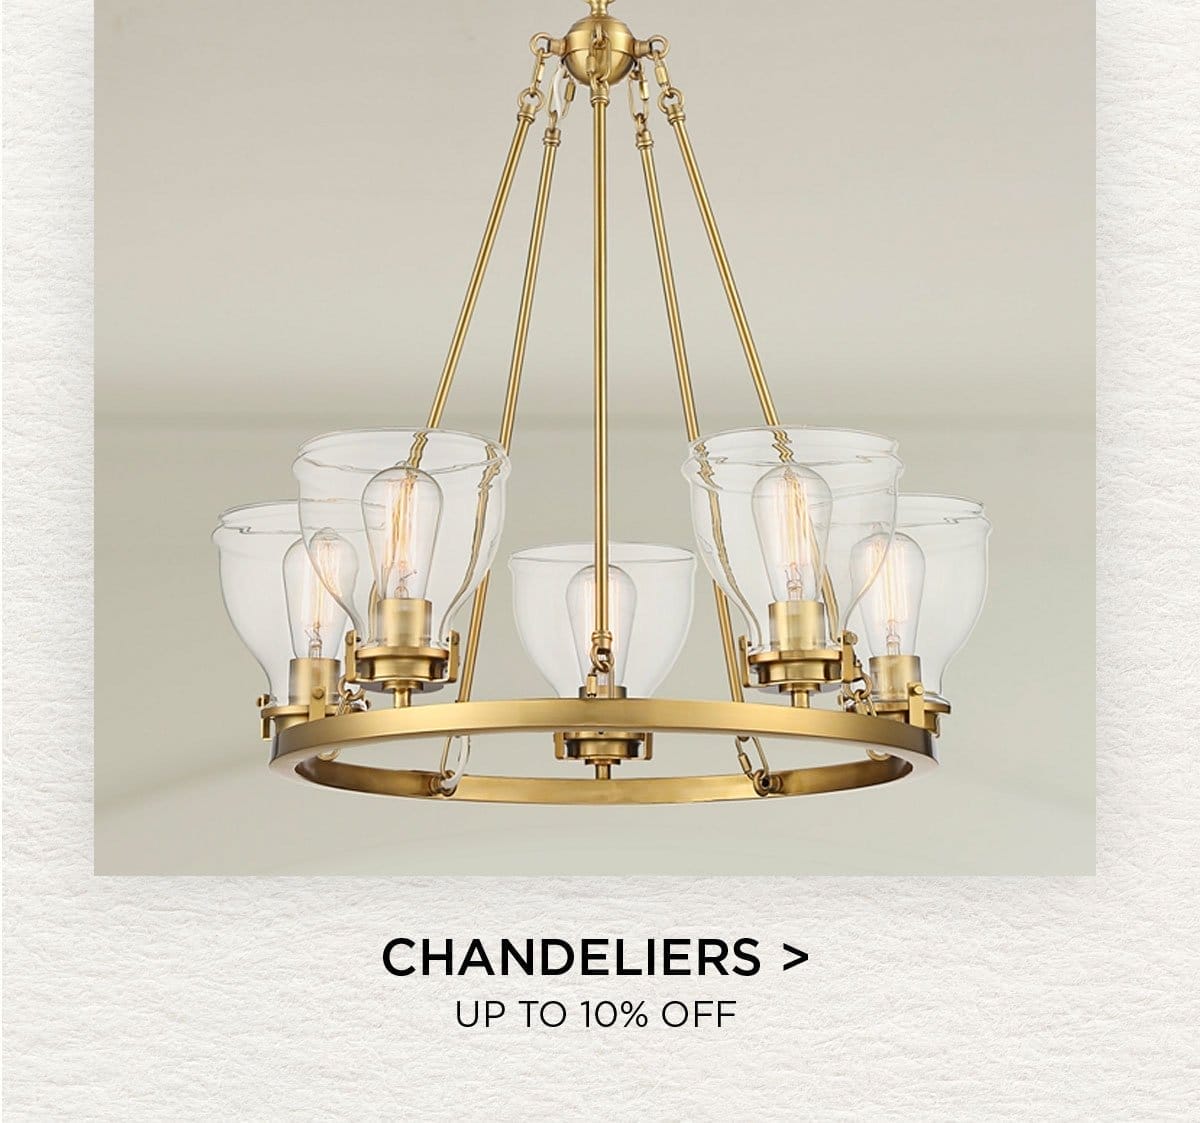 Chandeliers > - Up To 10% Off